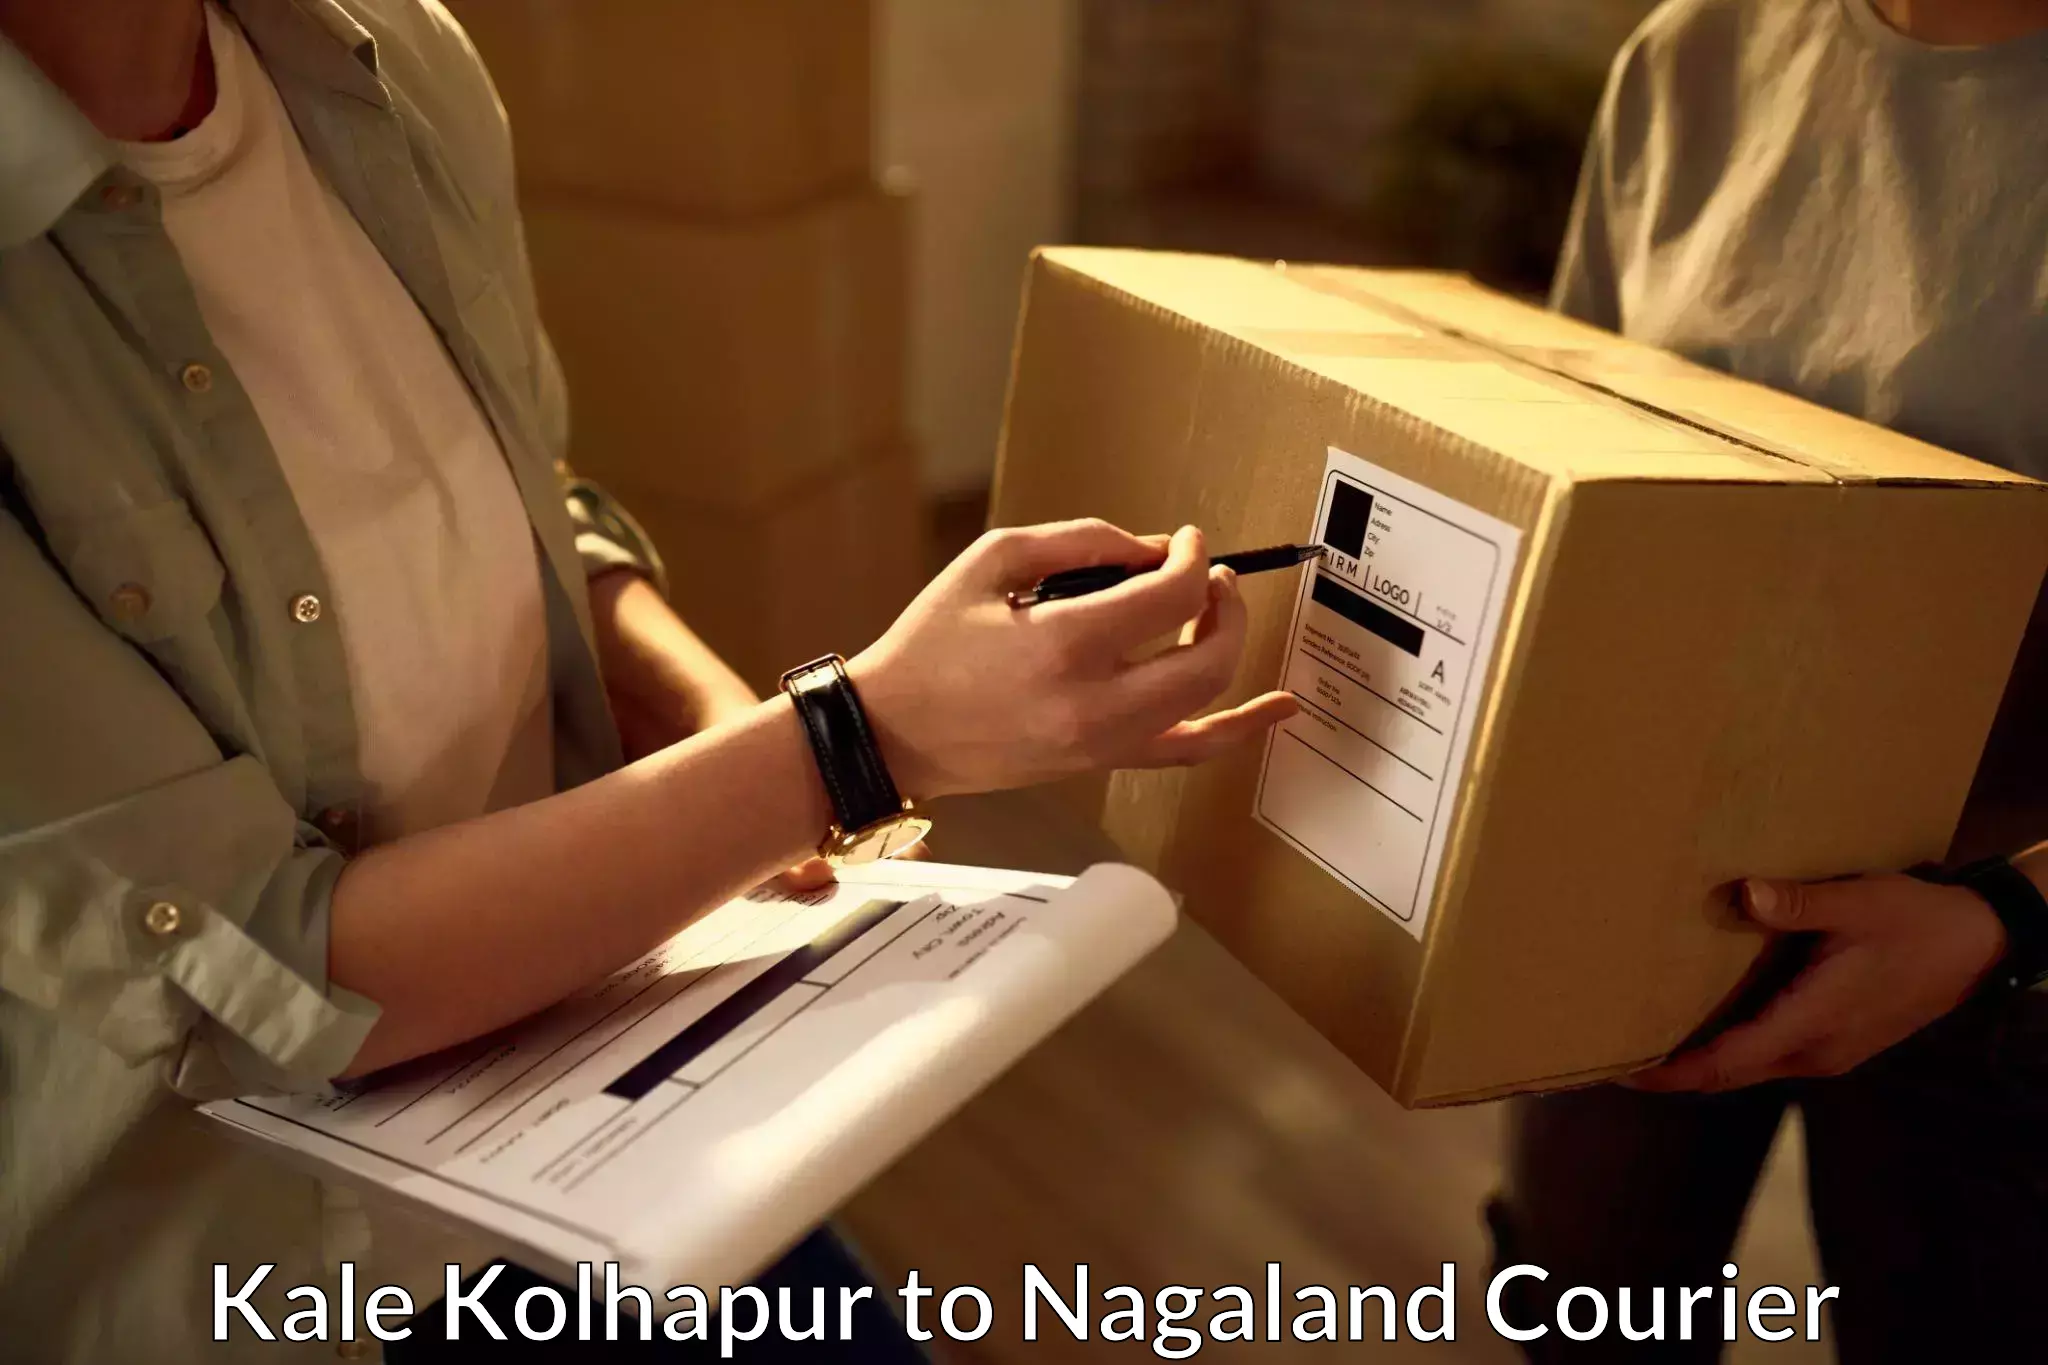 State-of-the-art courier technology Kale Kolhapur to Dimapur